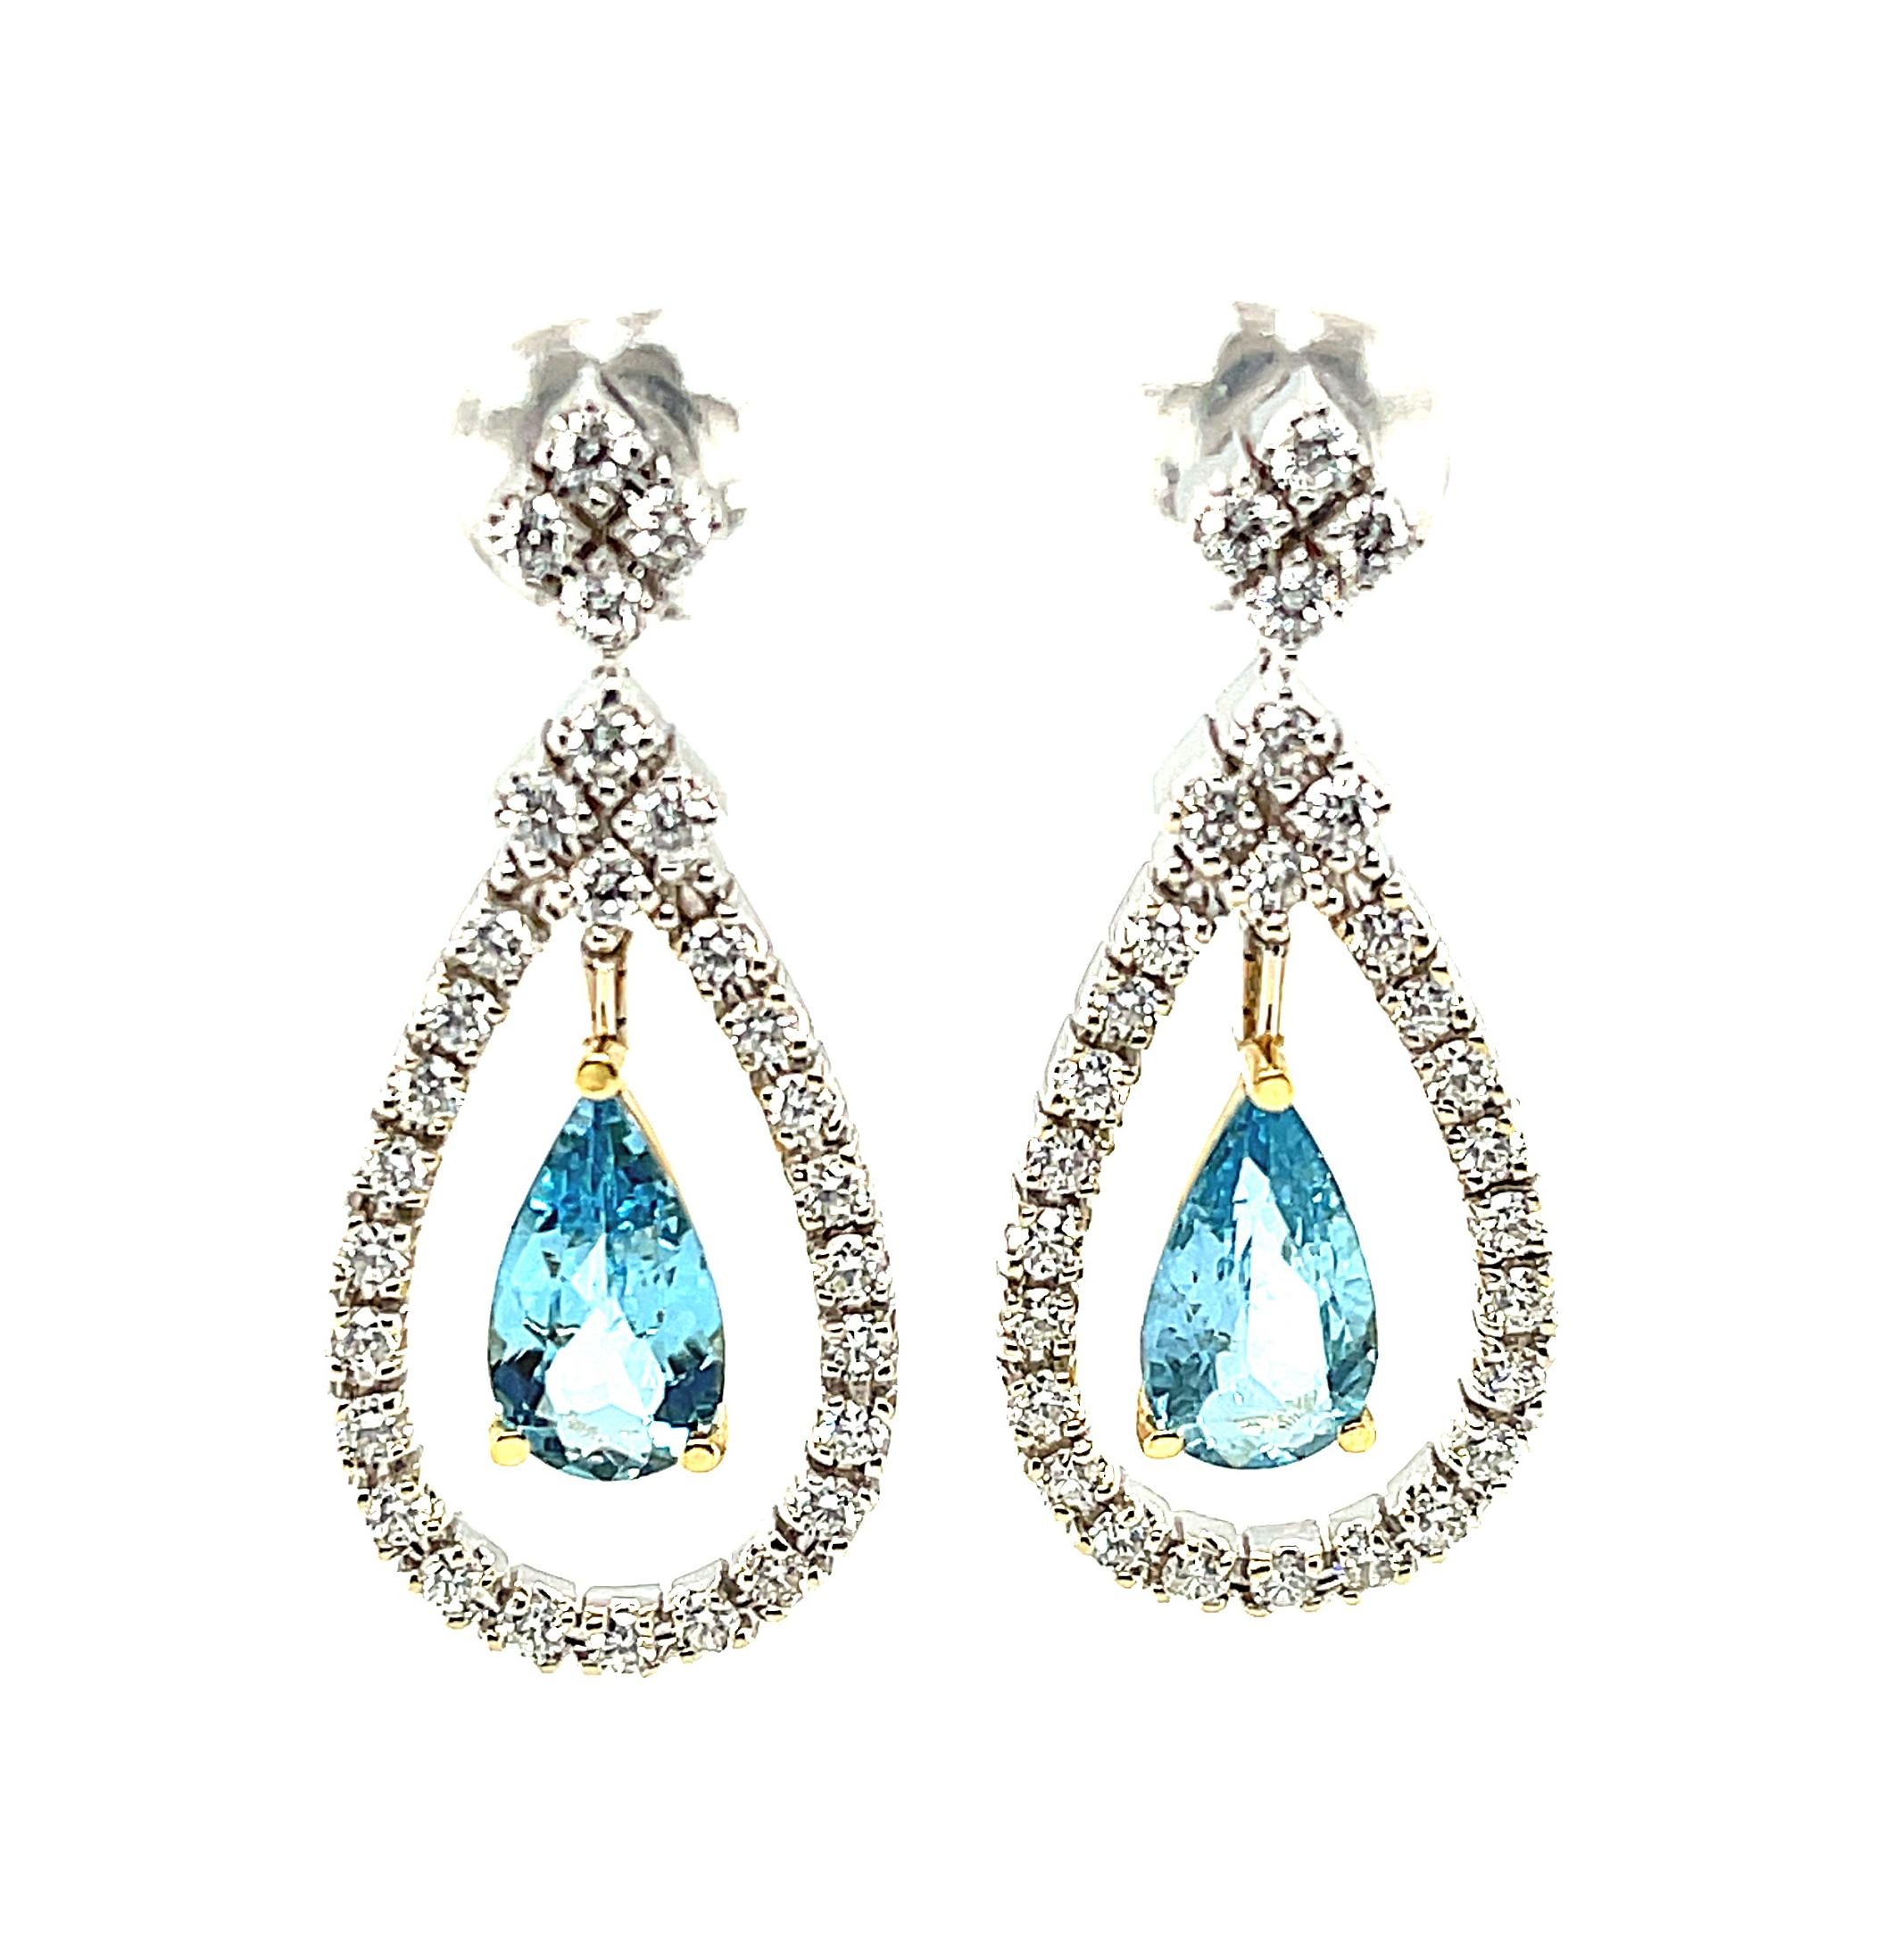 These stunning 18k white gold dangle earrings feature extremely fine, natural color aquamarines framed by diamond studded floating halos in an elegant and ultra-sophisticated design! Aquamarines of vibrant, saturated color and high quality are